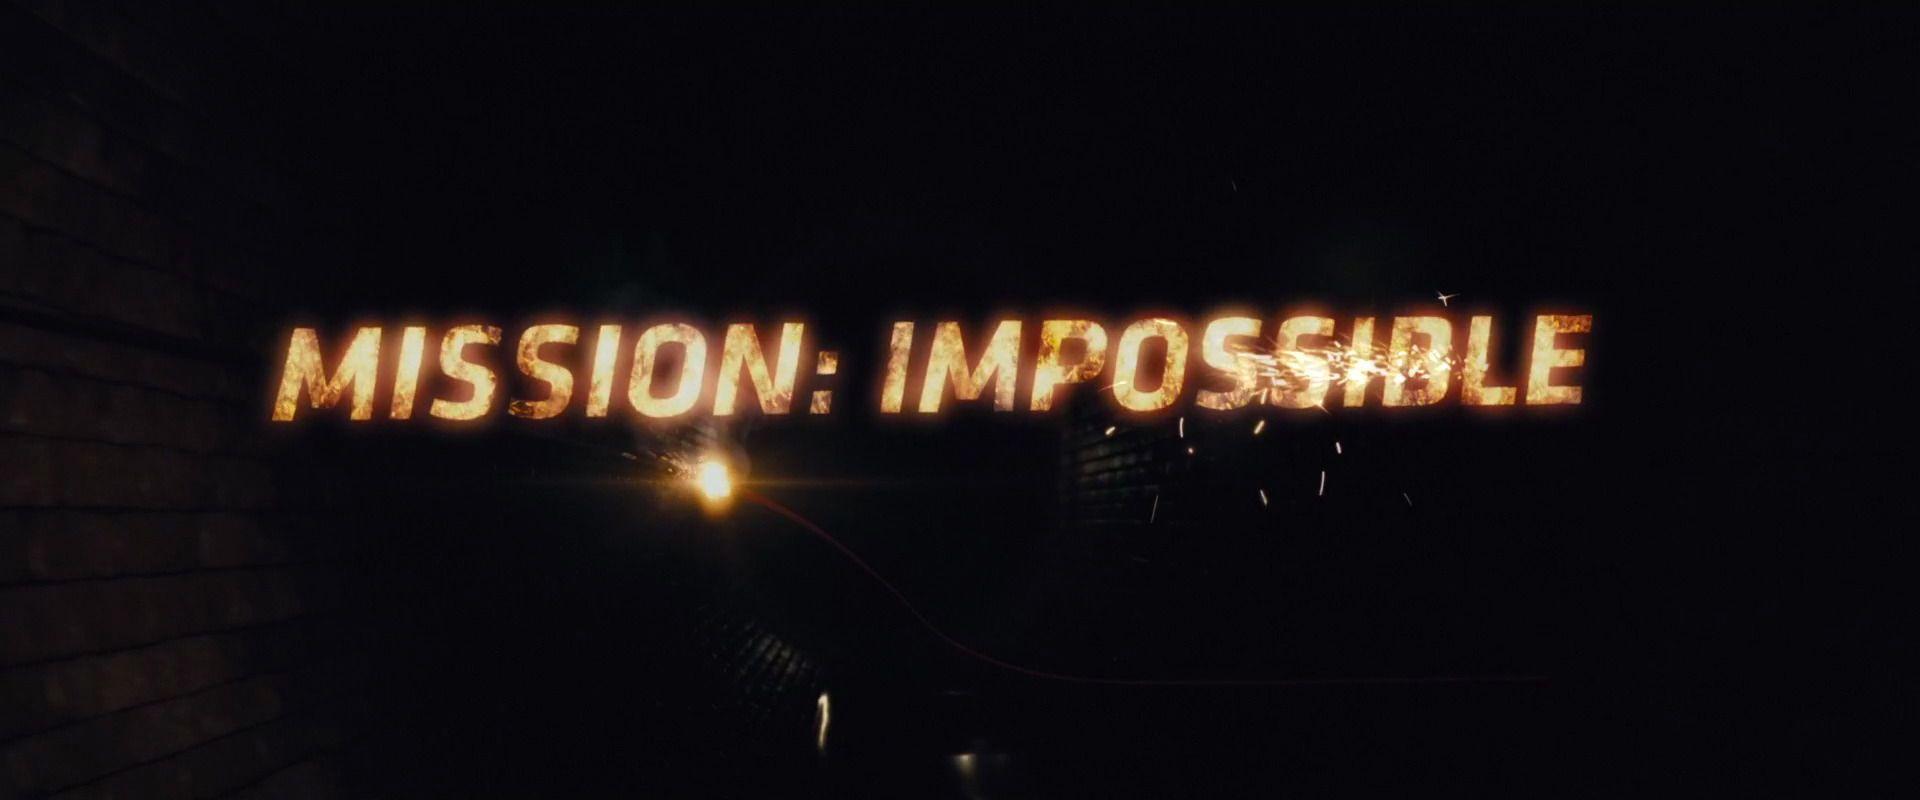 Inpossible Logo - Mission Logo (GP). Film and Television